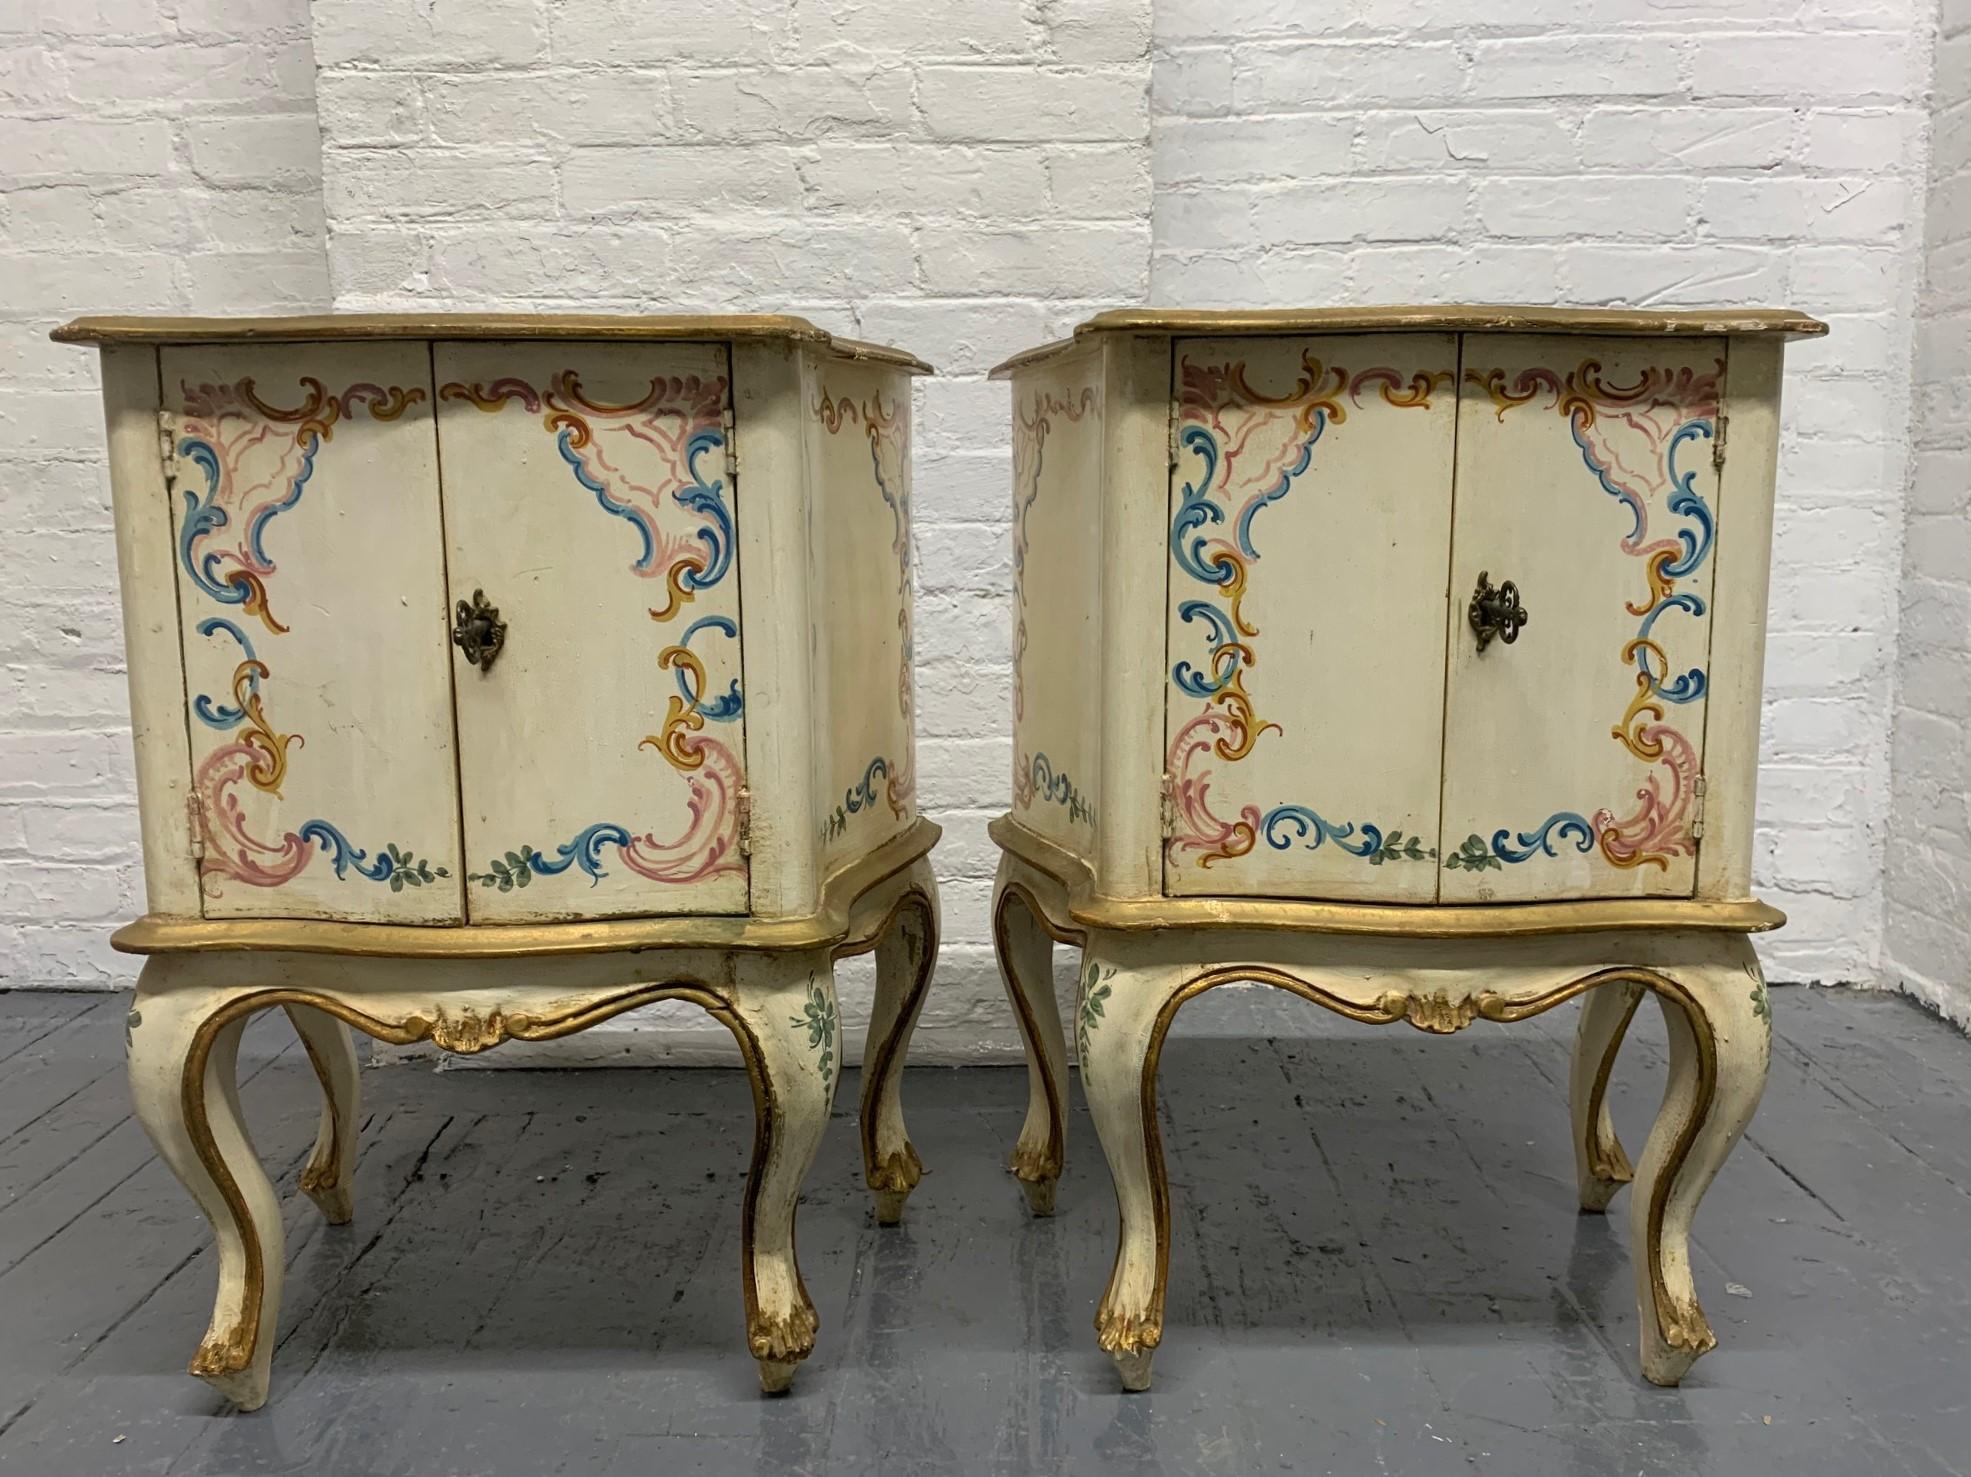 Pair of painted Venetian cabinets or nightstands. Made in Italy, 1950s. Original brass hardware and gold gilt trim.